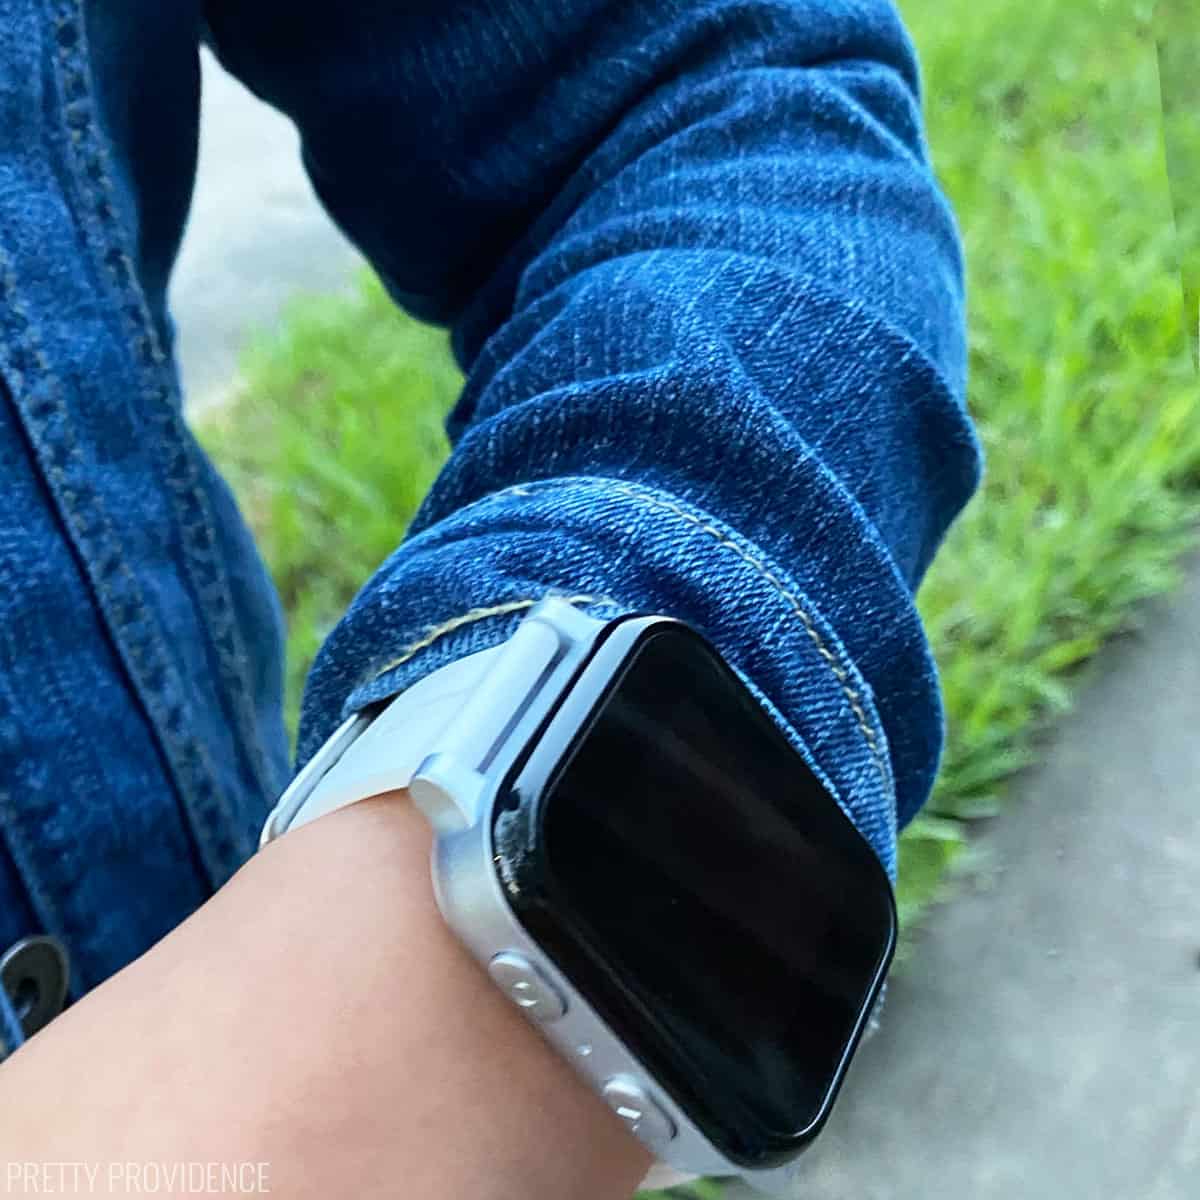 Best Watch Phone for Kids: Gabb Watch Review - $25 off Coupon